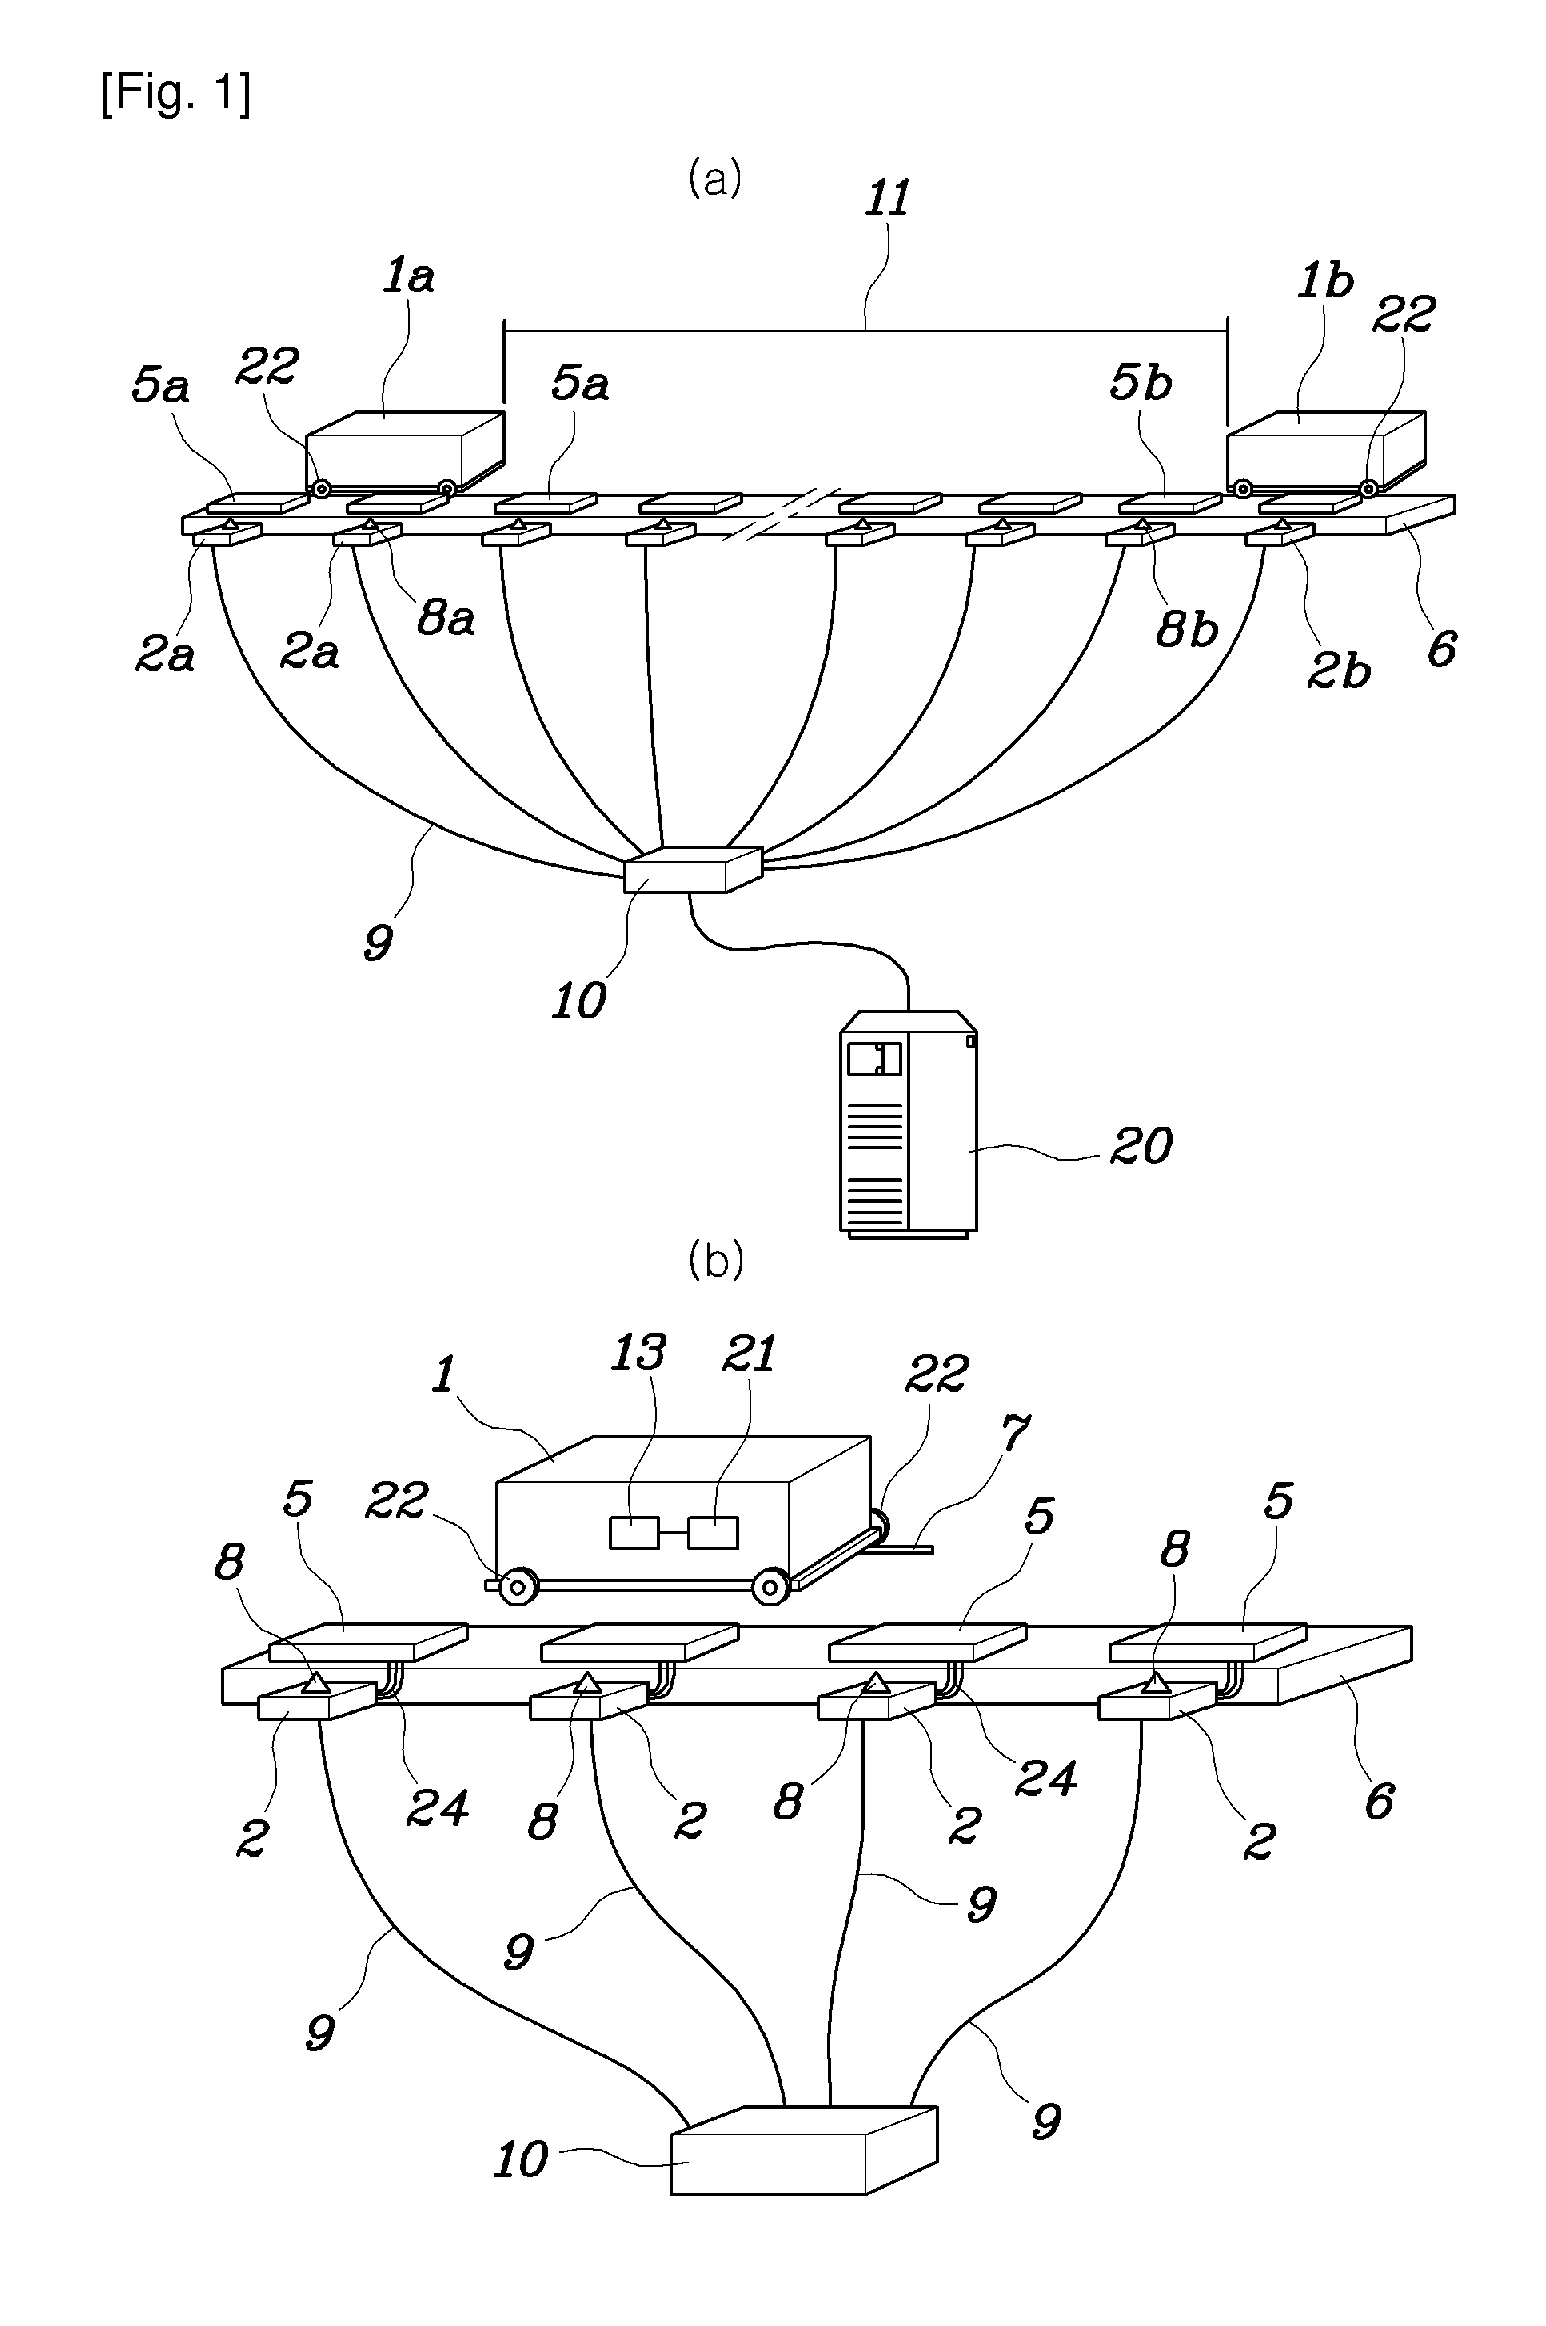 Method and System for Merge Control in an Automated Vehicle System